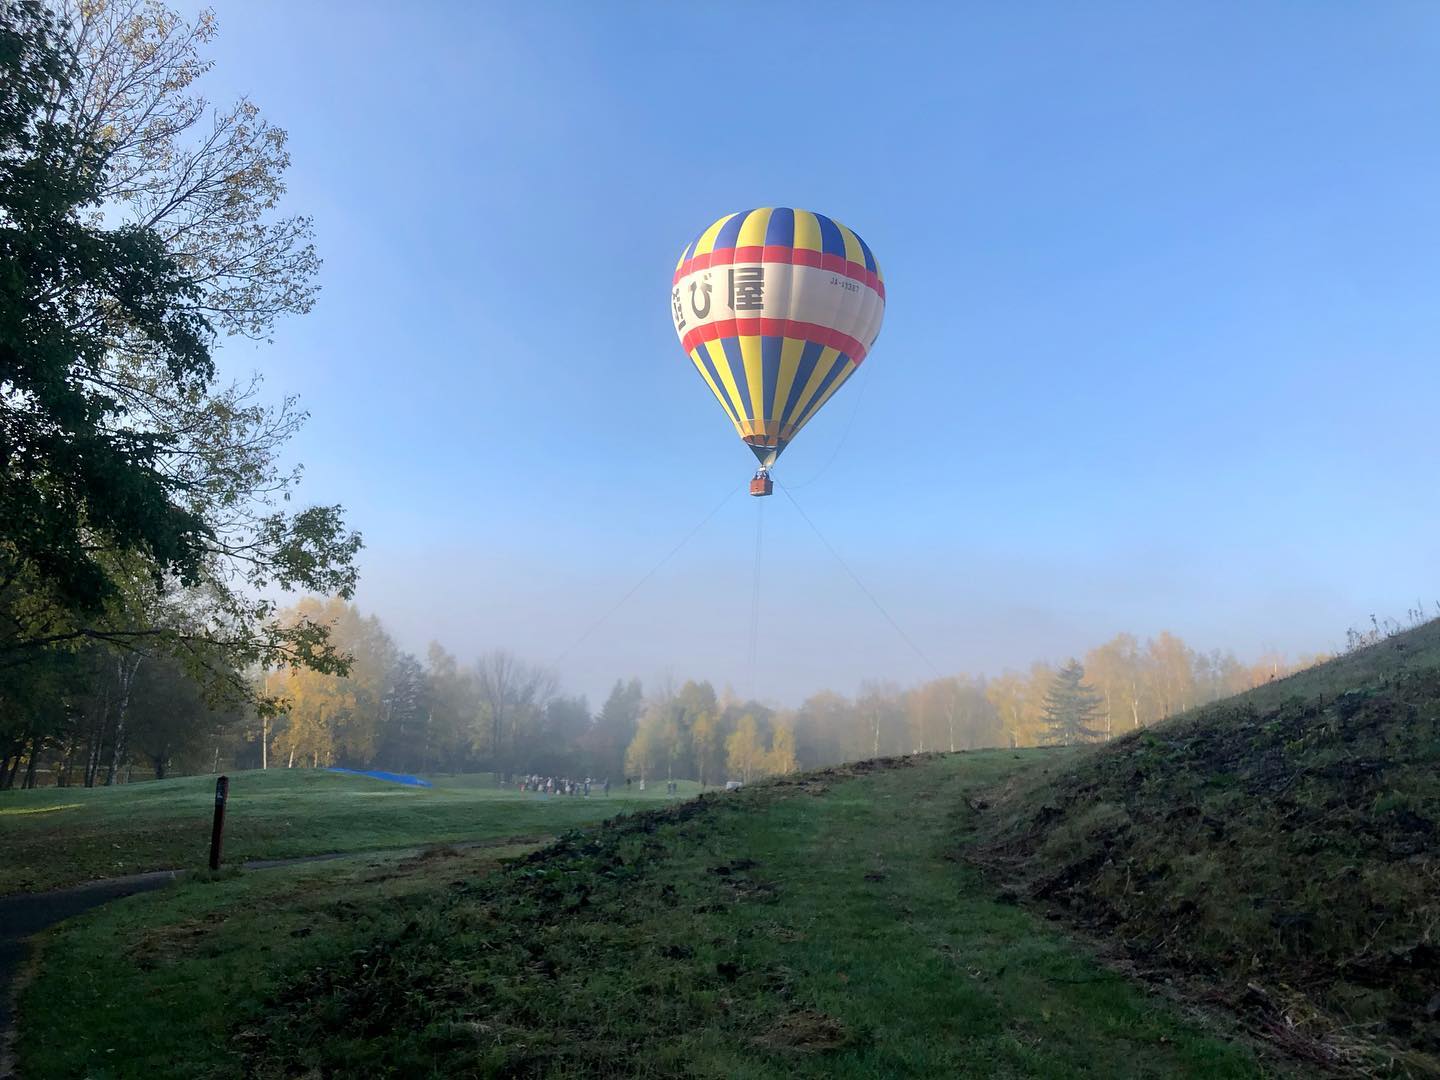 _⁣
Today’s  #shootinjapan from AOI Global is a hot air balloon, floating in the picturesque morning sky of central Hokkaido

Hokkaido is the largest and northernmost prefecture of Japan with world-renowned ski resorts and volcanic hot springs️
Hokkaido’s many national parks and rural landscapes attract outdoor lovers from all over the globe.

#aoiglobal  #filmproduction  #productioncompany  #filmmakersworld  #productionservices  #shootinglocation  #filmwork  #filmmakinglife  t #weeklyinspiration  #remoteshoot  #remoteshootinjapan  #remoteshooting⁣